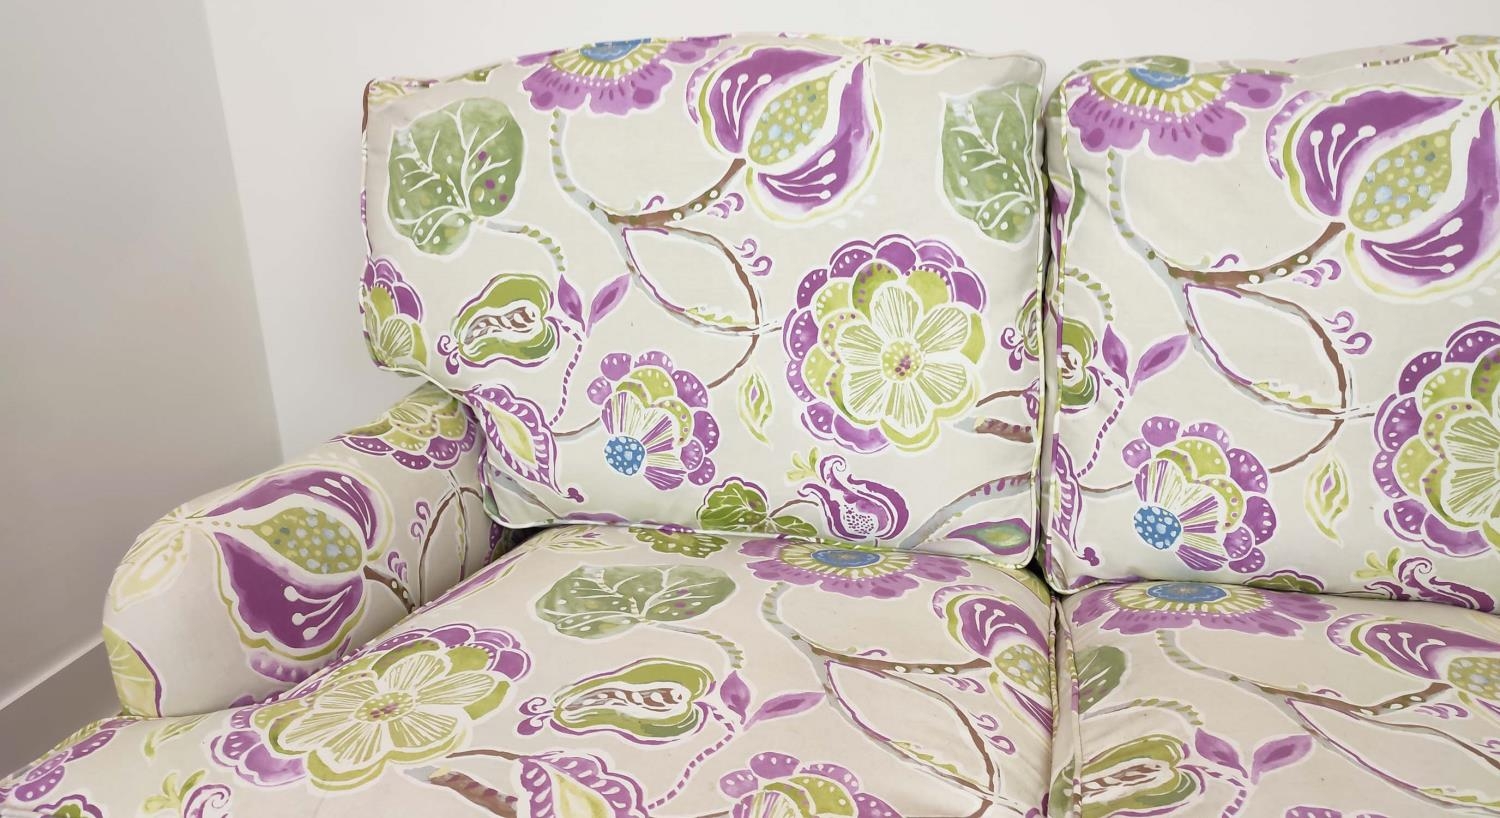 SOFA, purple and green floral patterned on brass castors, 90cm H x 160cm W. - Image 11 of 14